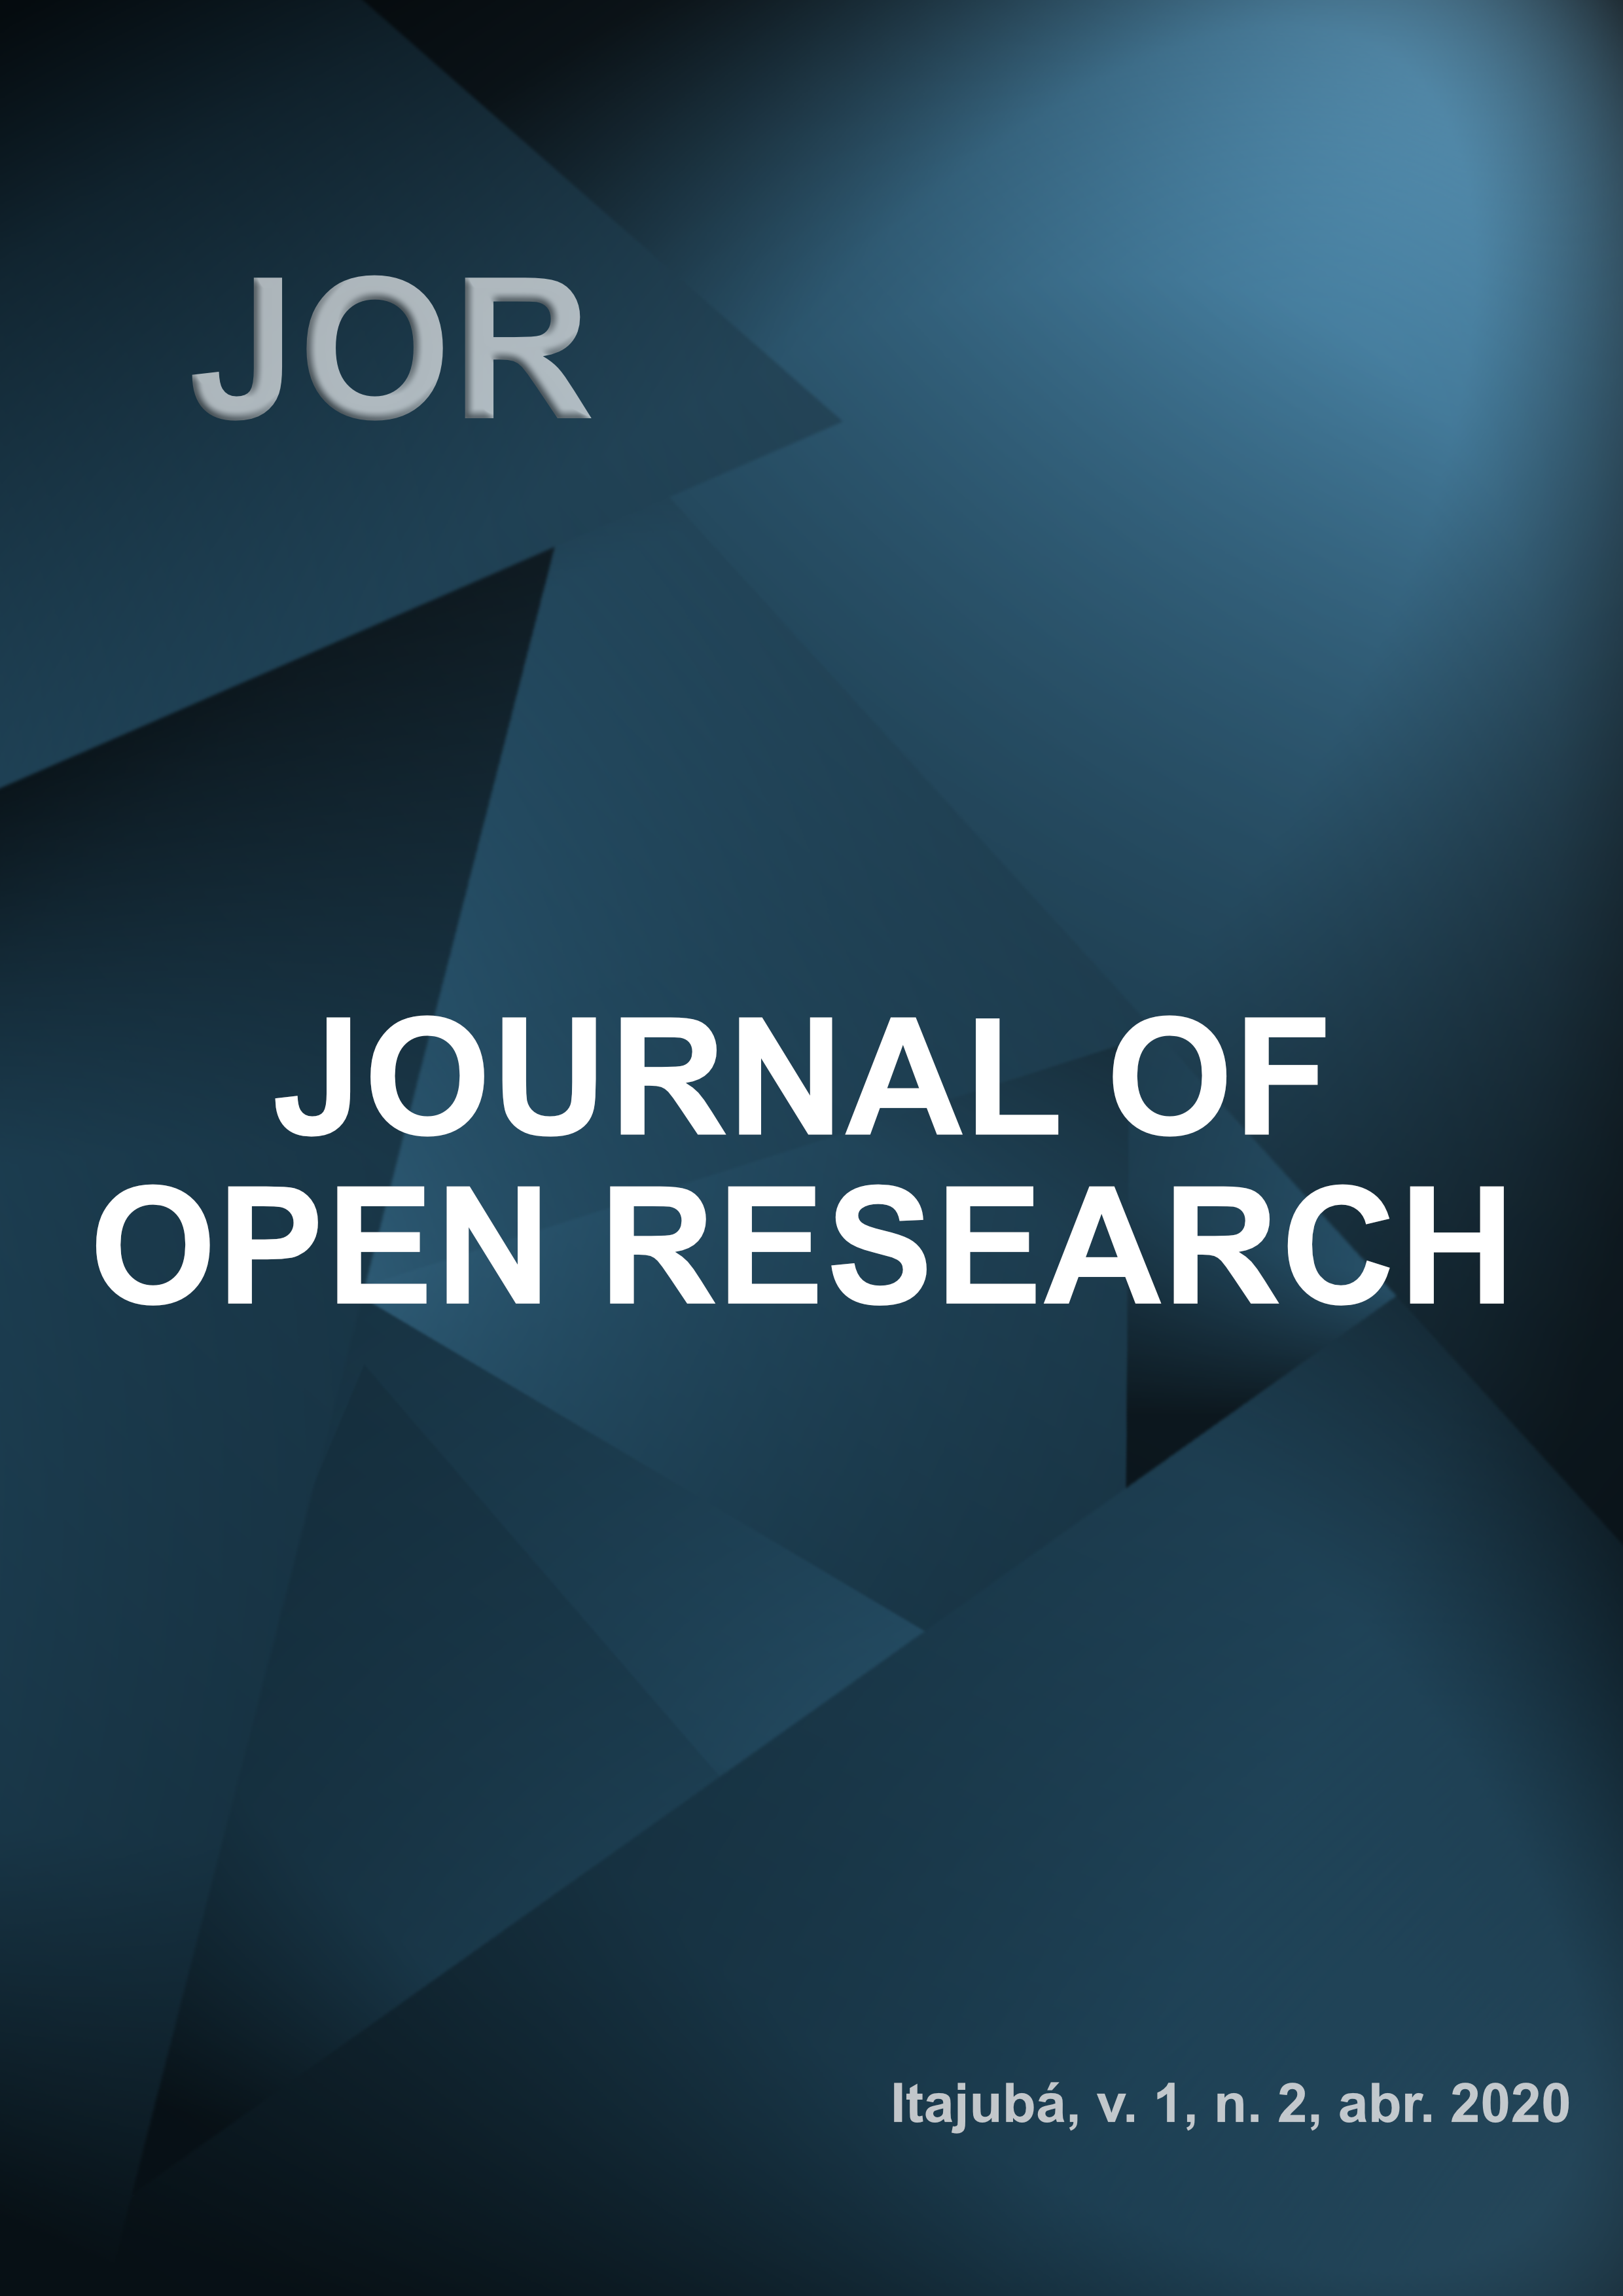 					Visualizar v. 1 n. 2 (2020): JOURNAL OF OPEN RESEARCH
				